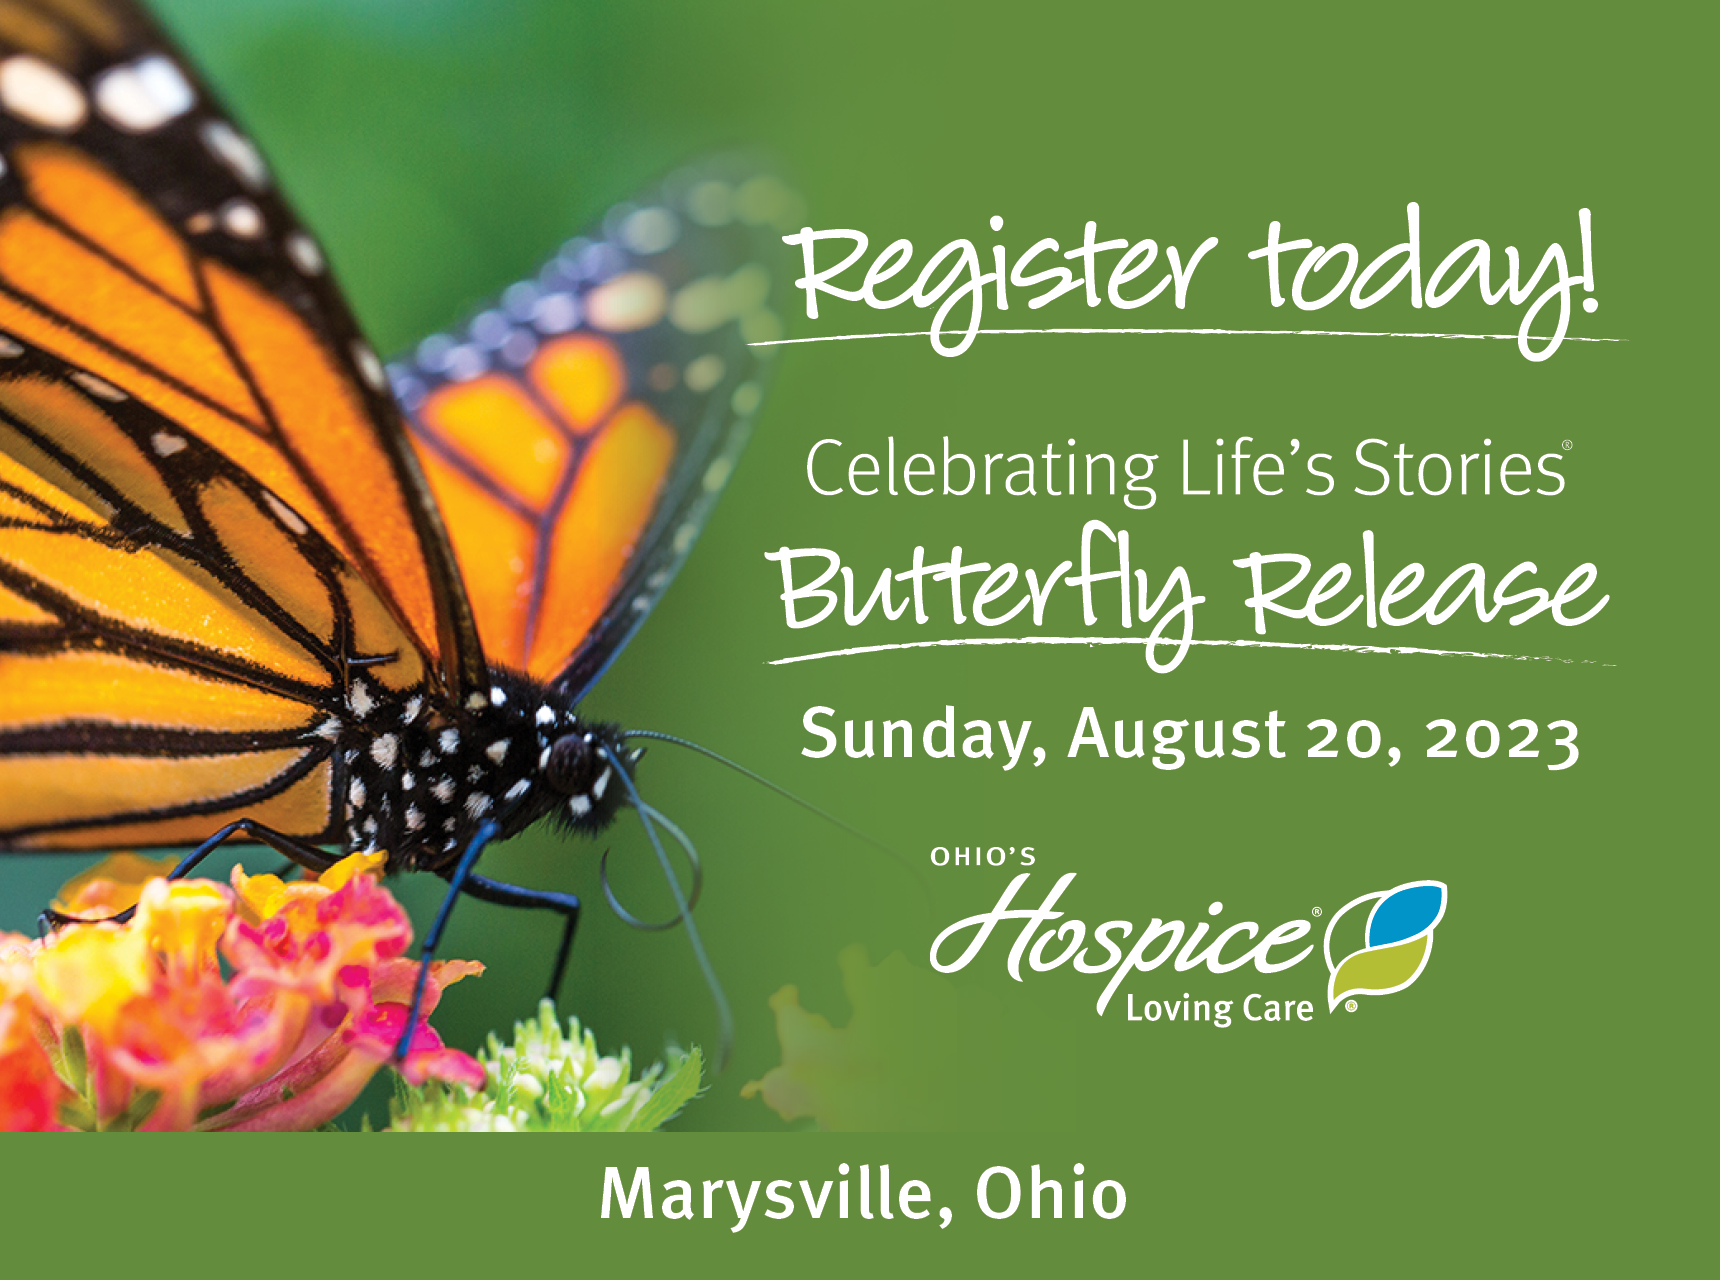 Register today! Celebrating Life's Stories Butterfly Release. Sunday, August 10, 2023. Ohio's Hospice Loving Care. Marysville, Ohio.